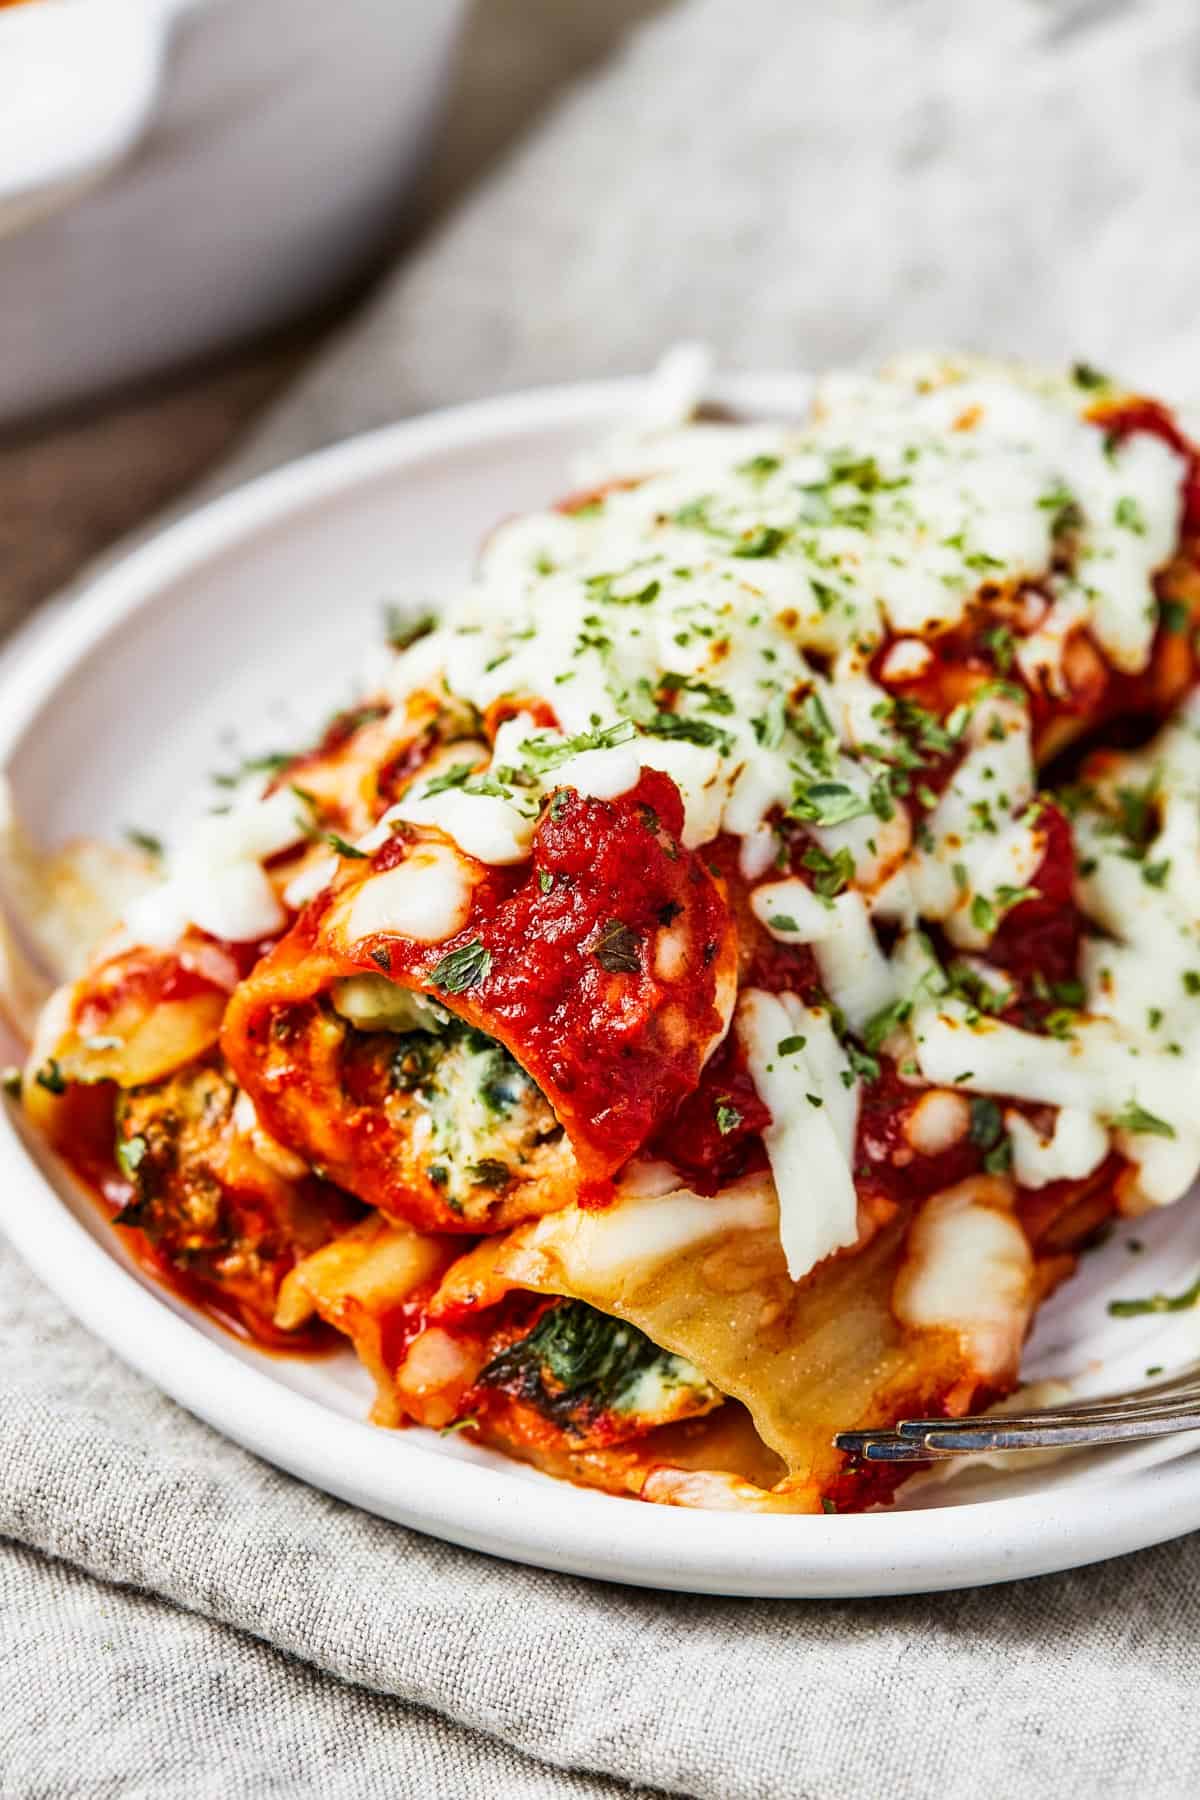 Cheese Manicotti served on a dinner plate.